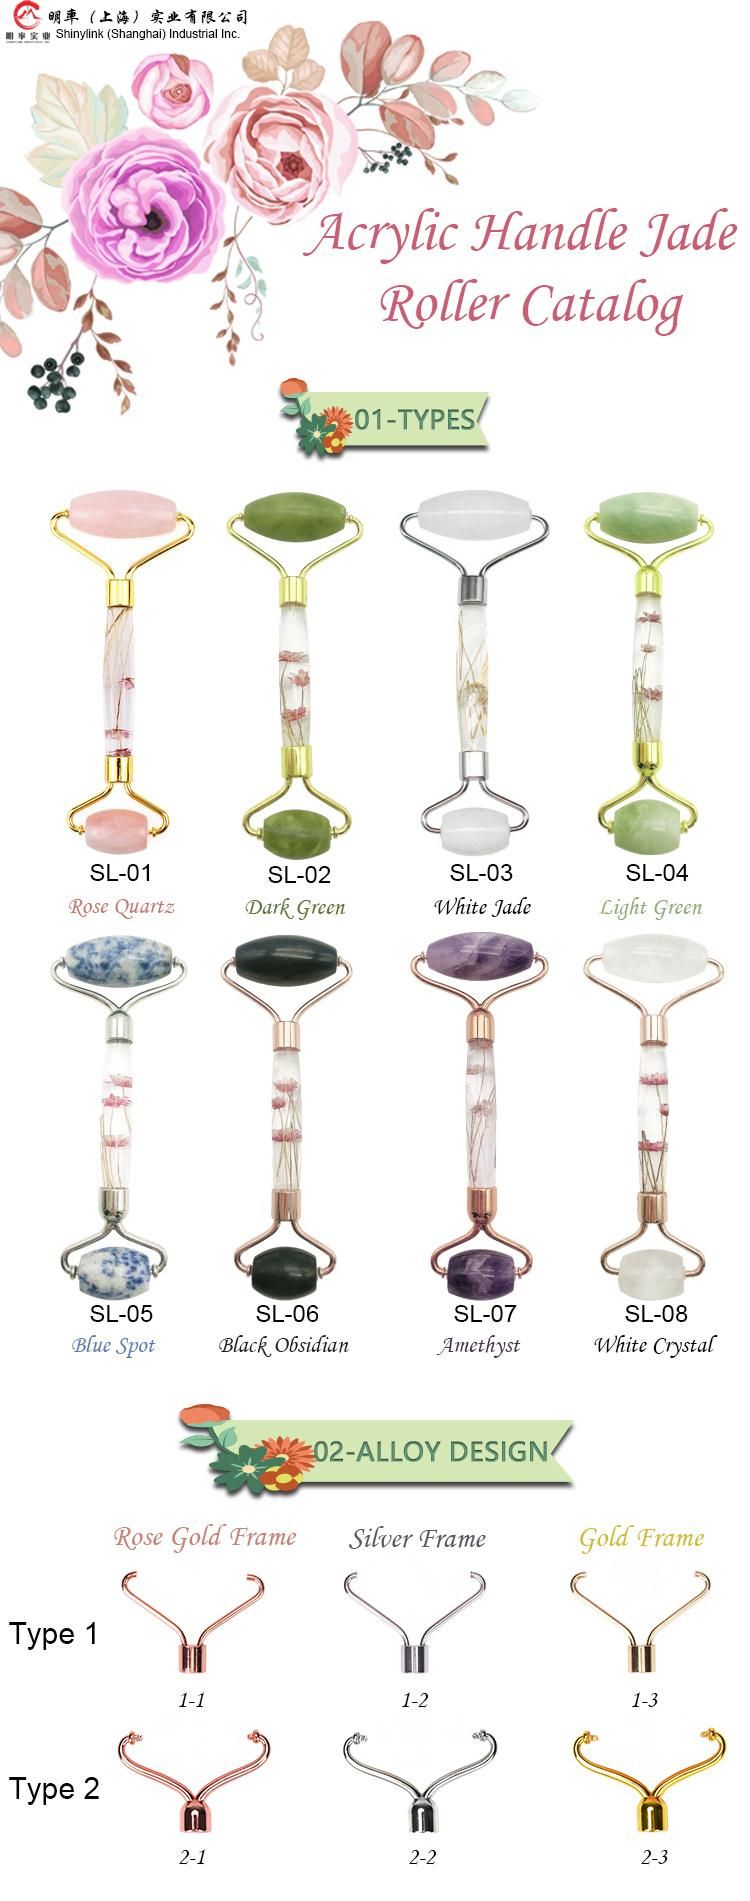 New Product Home Use Massage Tool Xiuyan Dong Ling Rose Quartz Green Obsidian Amethyst White Jade Roller Various Roller Collection